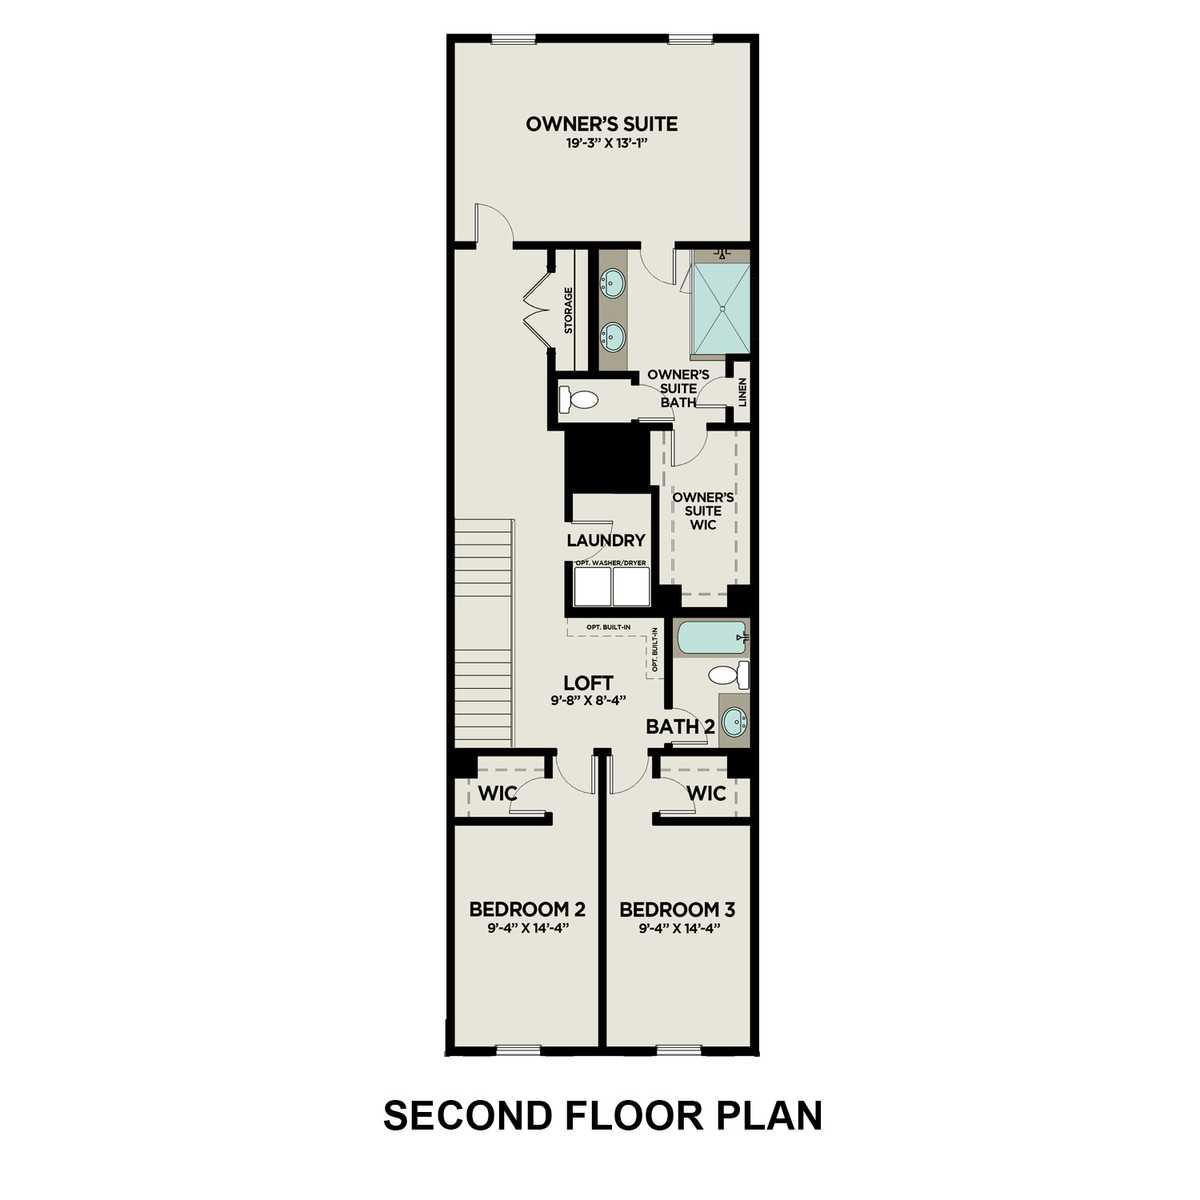 2 - The Seacrest A floor plan layout for 700 Stickley Oak Way in Davidson Homes' The Village at Towne Lake community.